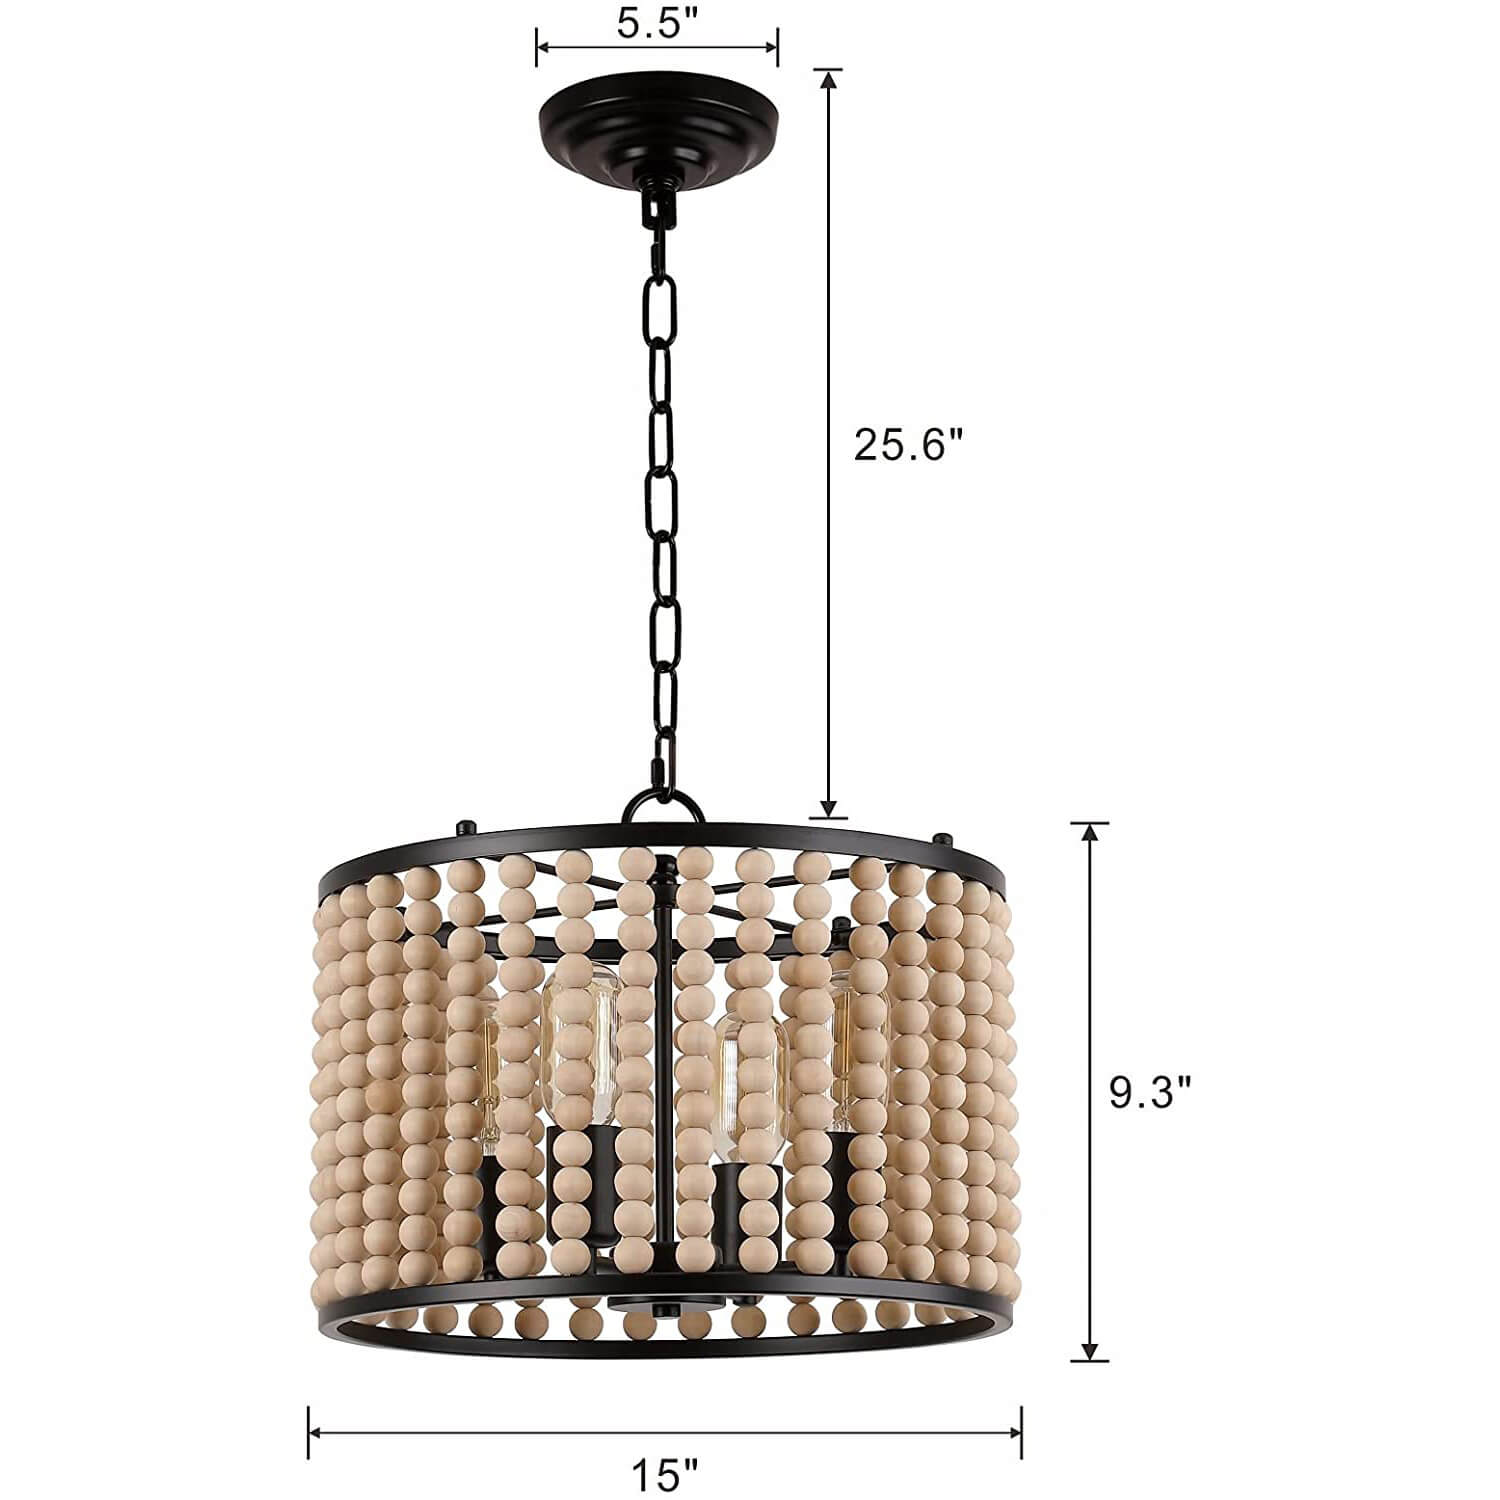 WOWOW 4-Light Farmhouse Ceiling Lights Fixtures Wood Beaded Celling Lantern